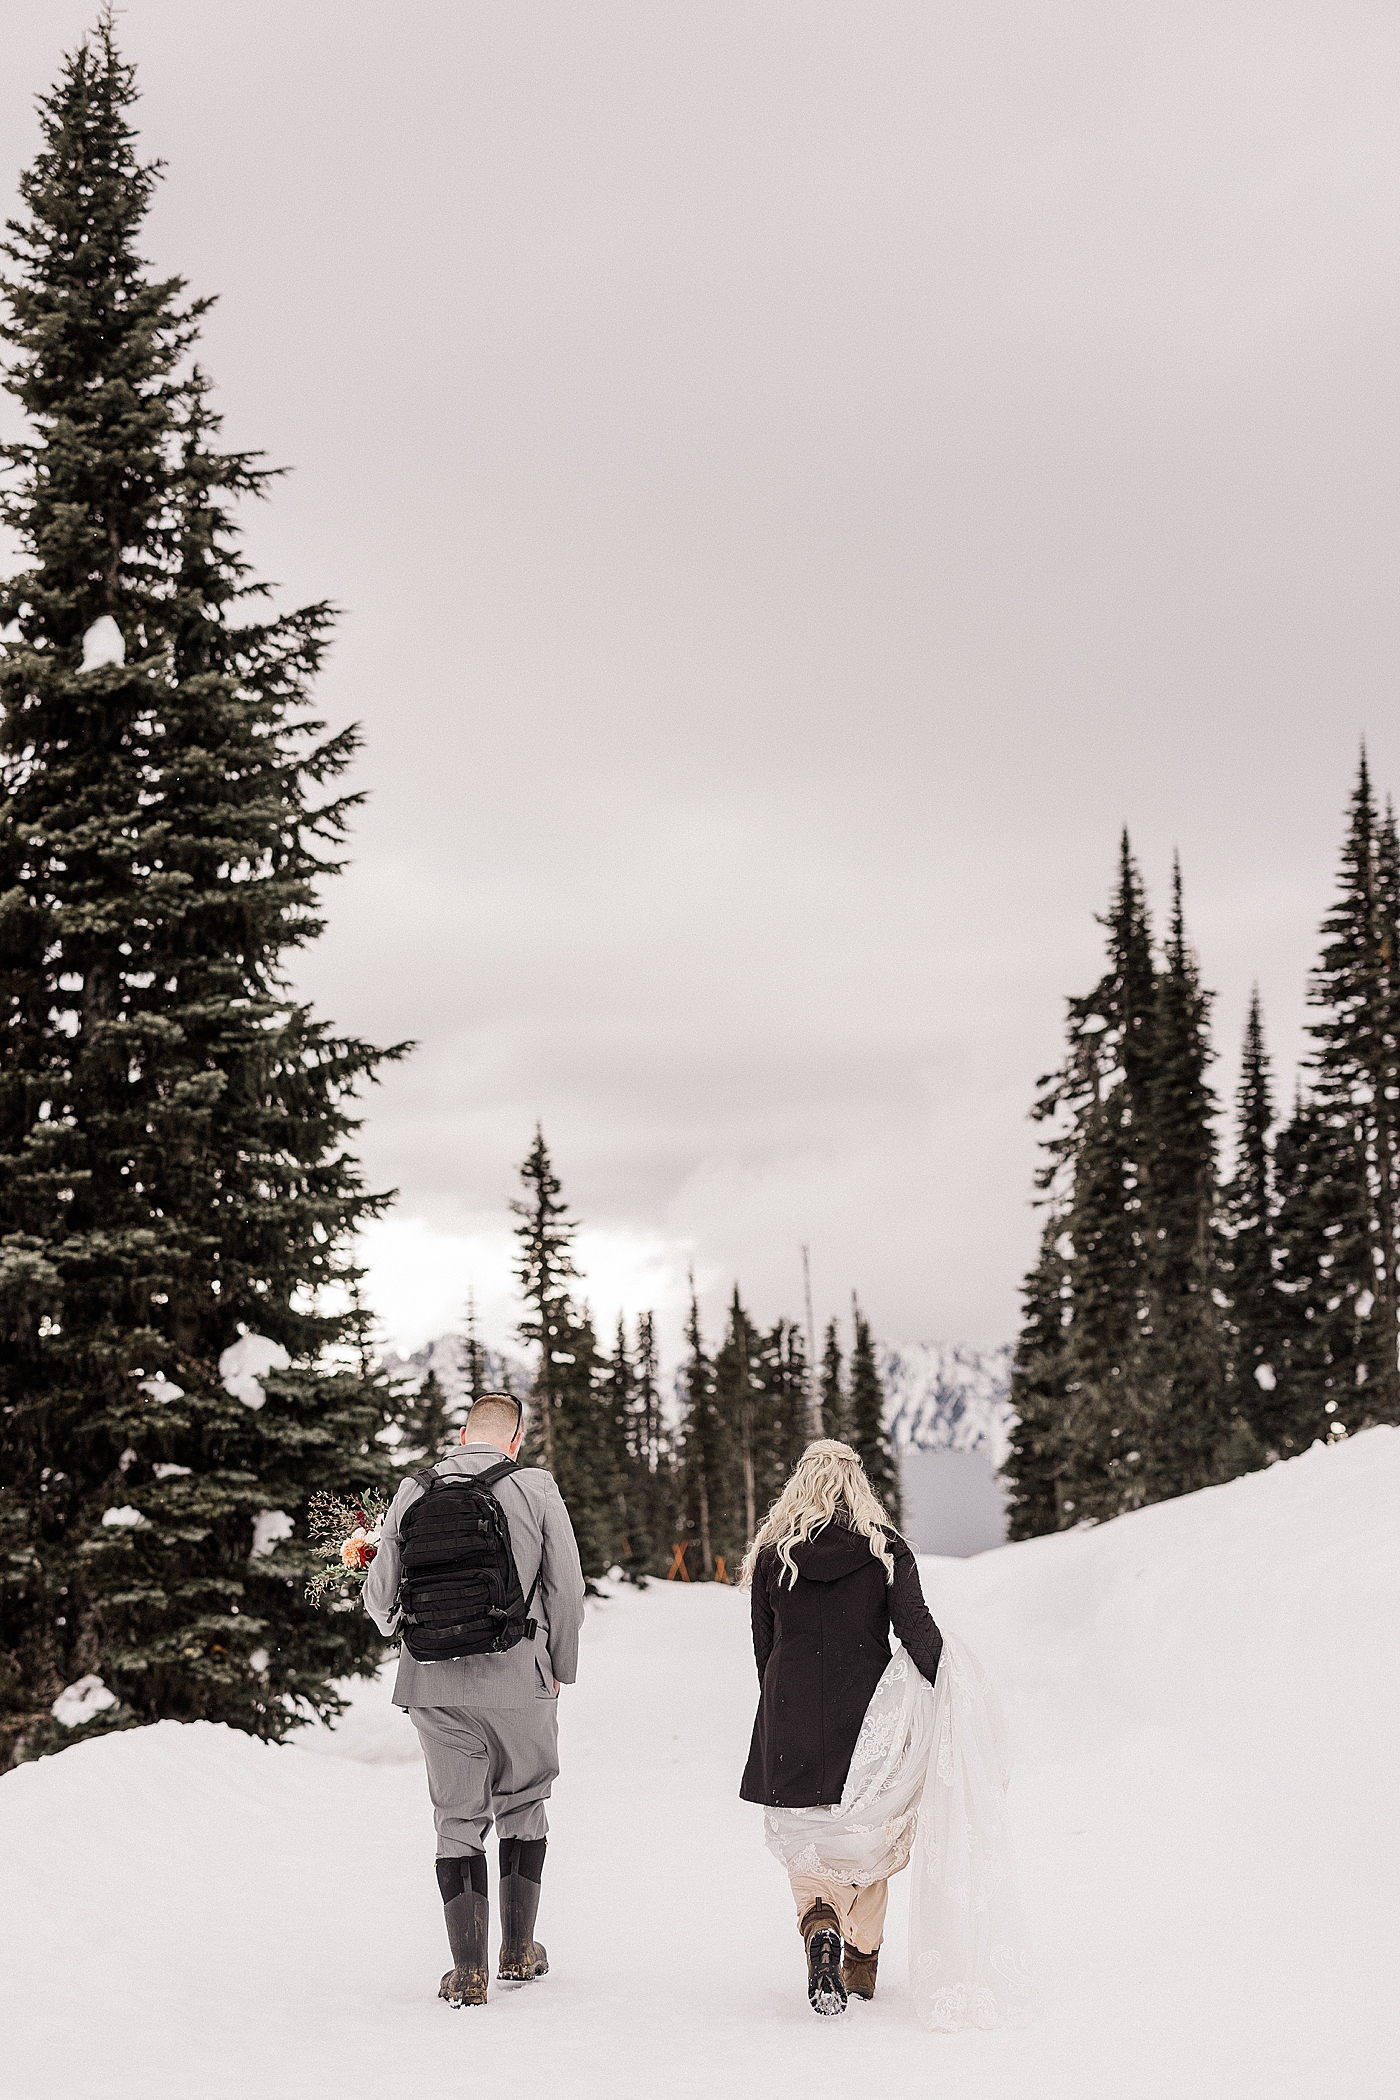 Bride and groom walking through the snow at Paradise in Mount Rainier National Park. Photo by Megan Montalvo Photography.